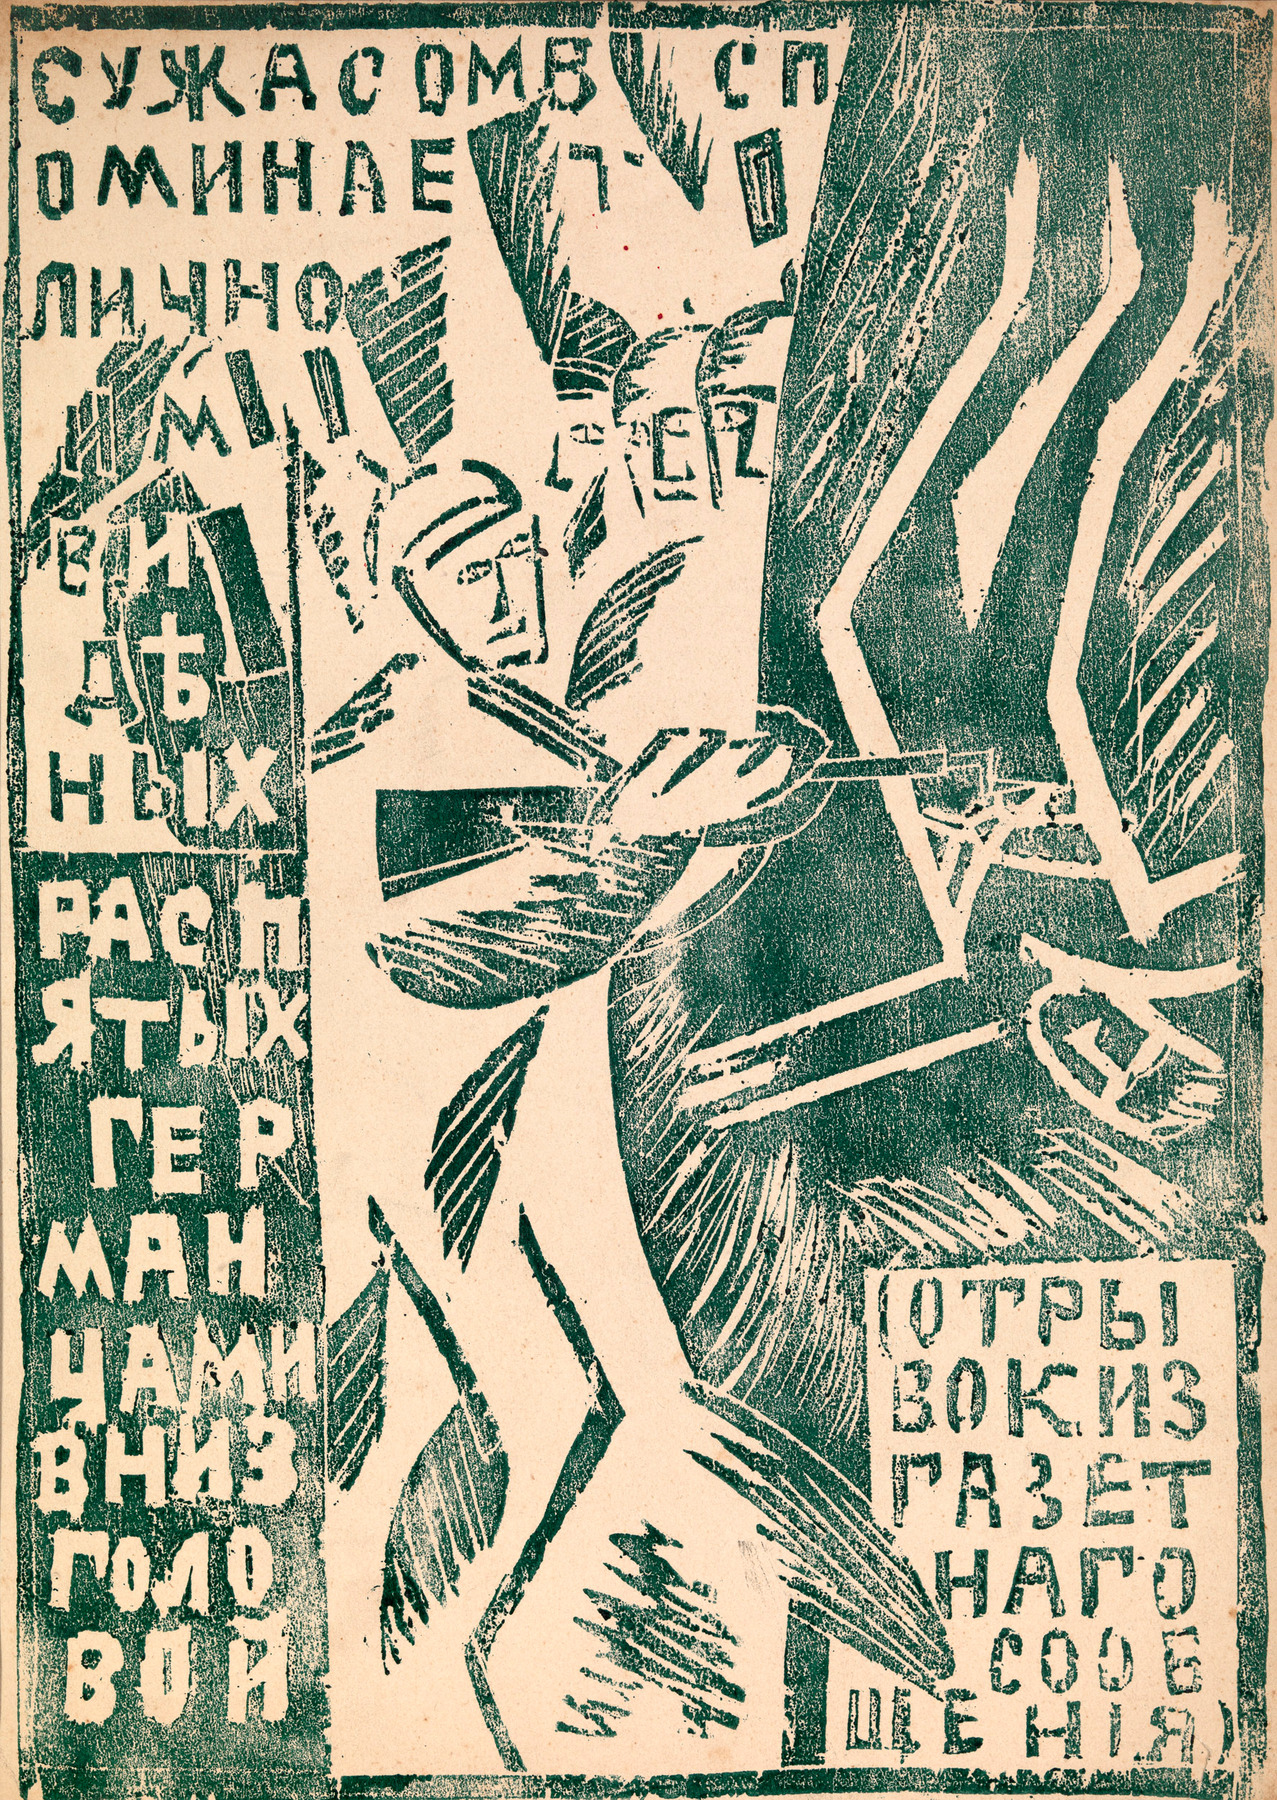 A Group of Five Illustrations for the Album "War" with Poems by Alexei Kruchenykh